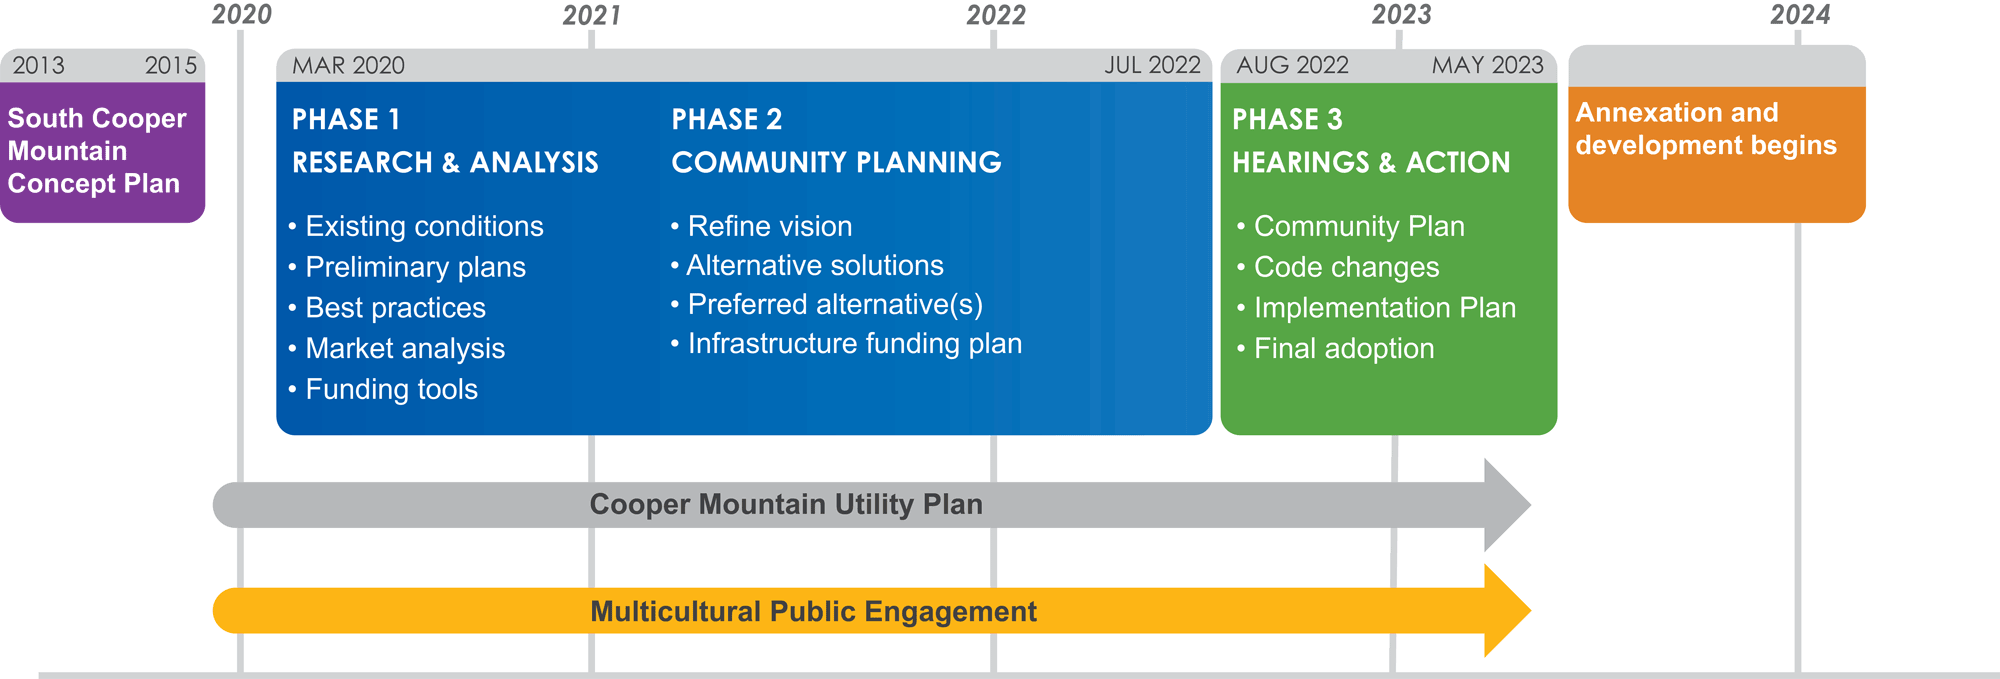 Timeline|The City is committed to engaging the public on the Community Plan. The project will use a range of outreach activities to be accessible to a broad audience. Work will take place in phases as shown in this schedule.